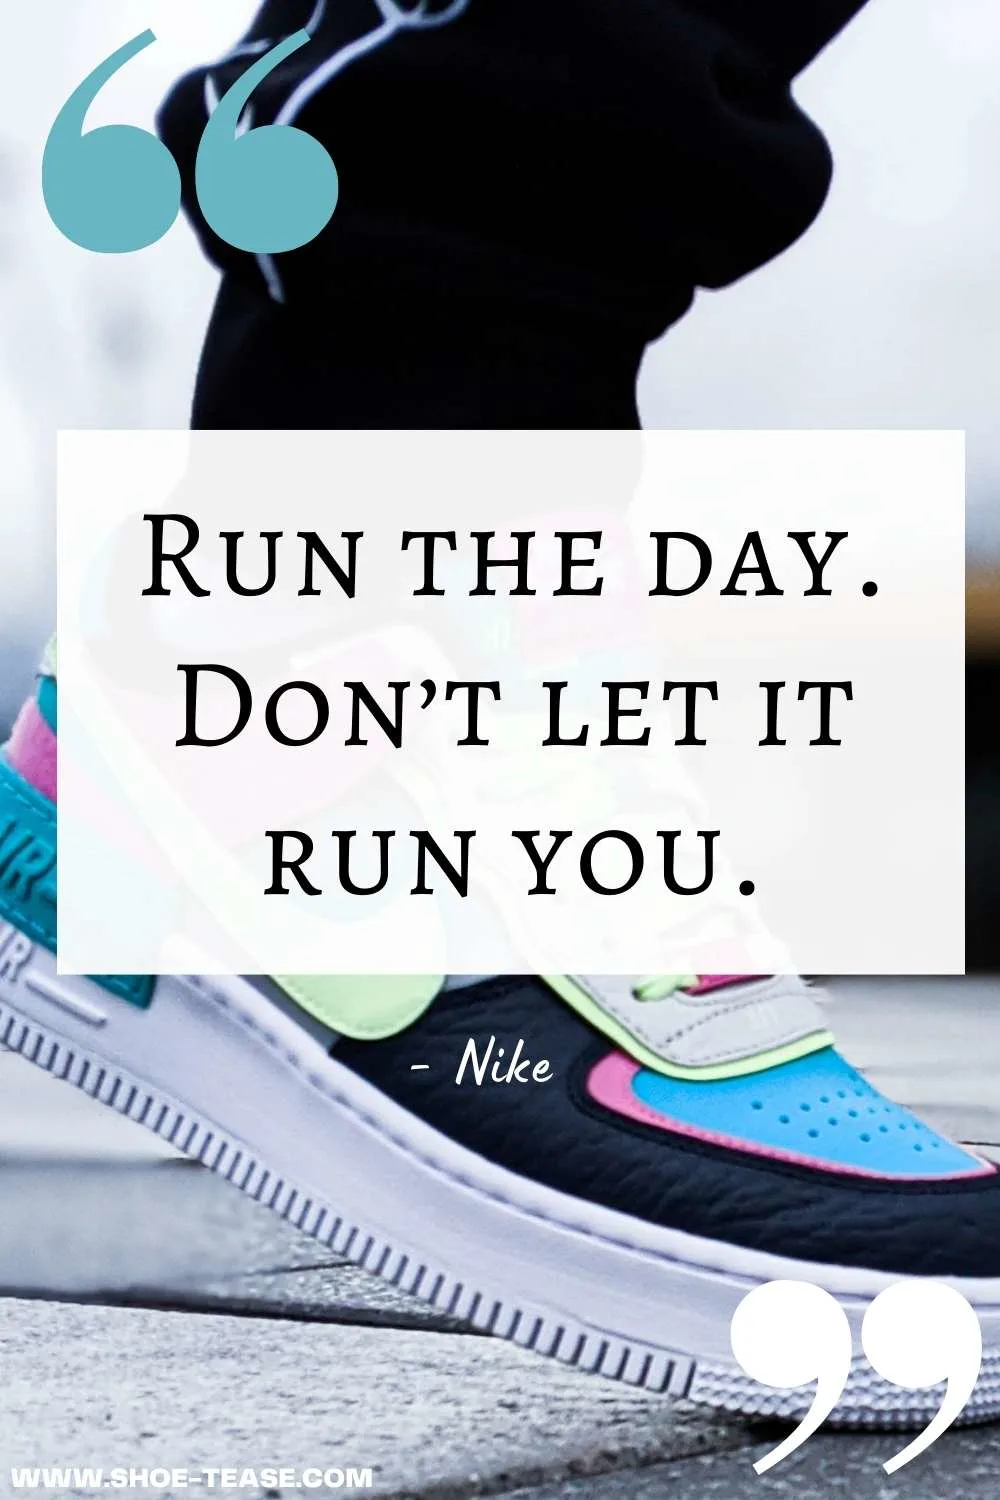 Plausible charla Puede ser ignorado Over 100 Best Nike Quotes, Motivational Slogans and Sayings about Nike